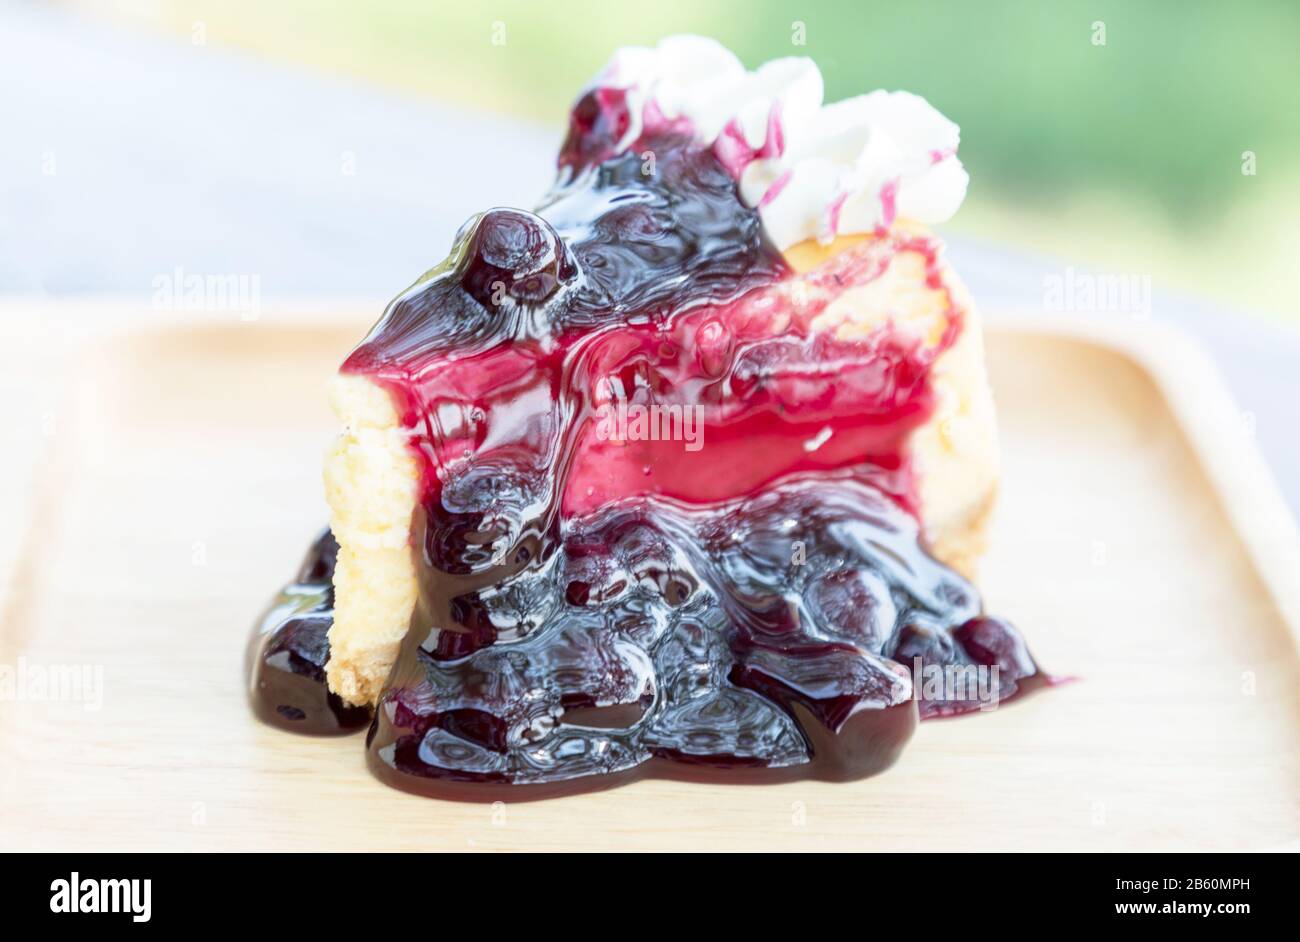 Blueberry cheesecake with cream on wooden plate on wood table at restaurant. Stock Photo